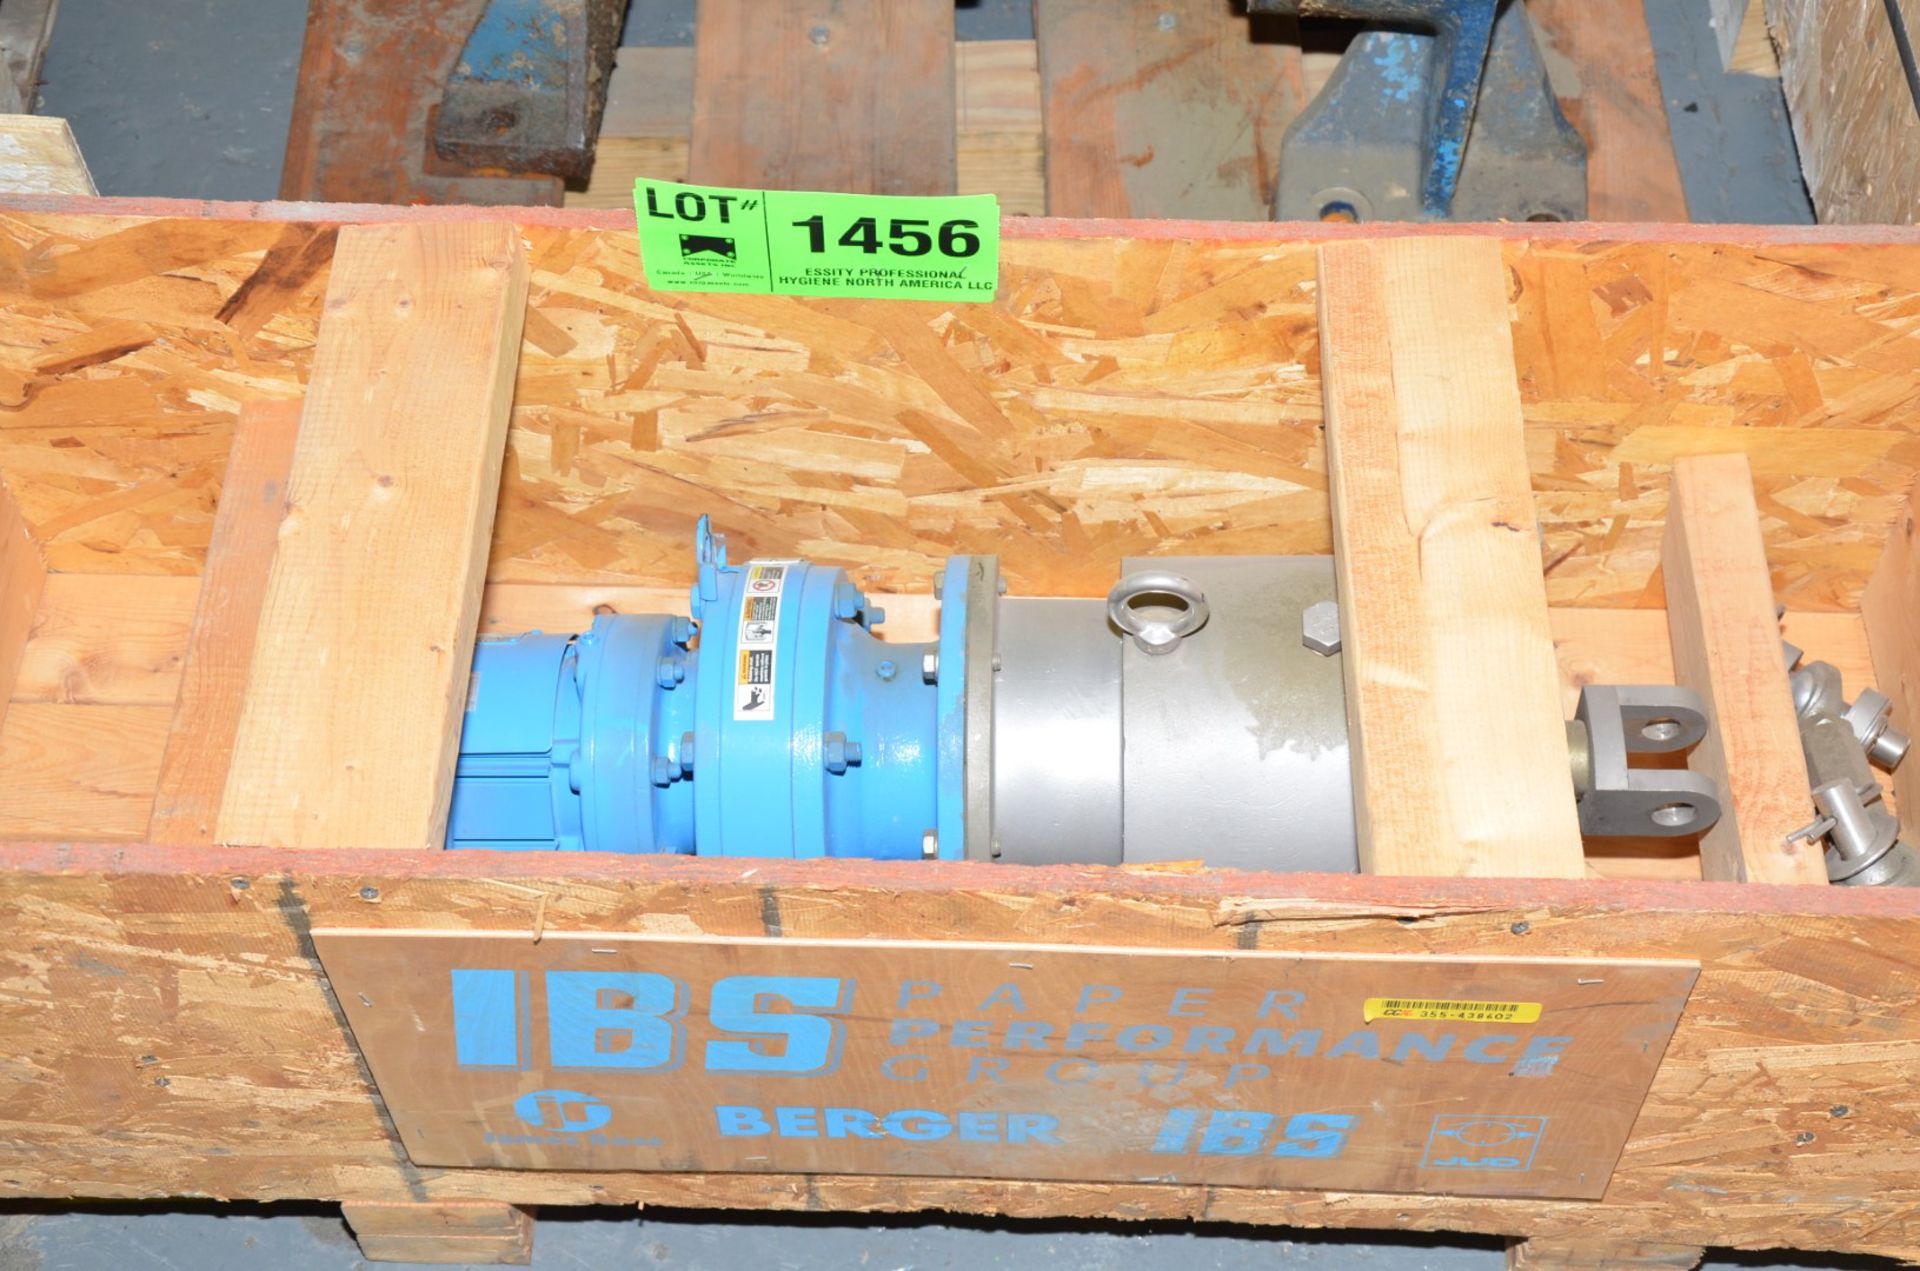 JAMES ROSS ELECTRIC POWER ACTUATOR [RIGGING FEE FOR LOT #1456 - $25 USD PLUS APPLICABLE TAXES]